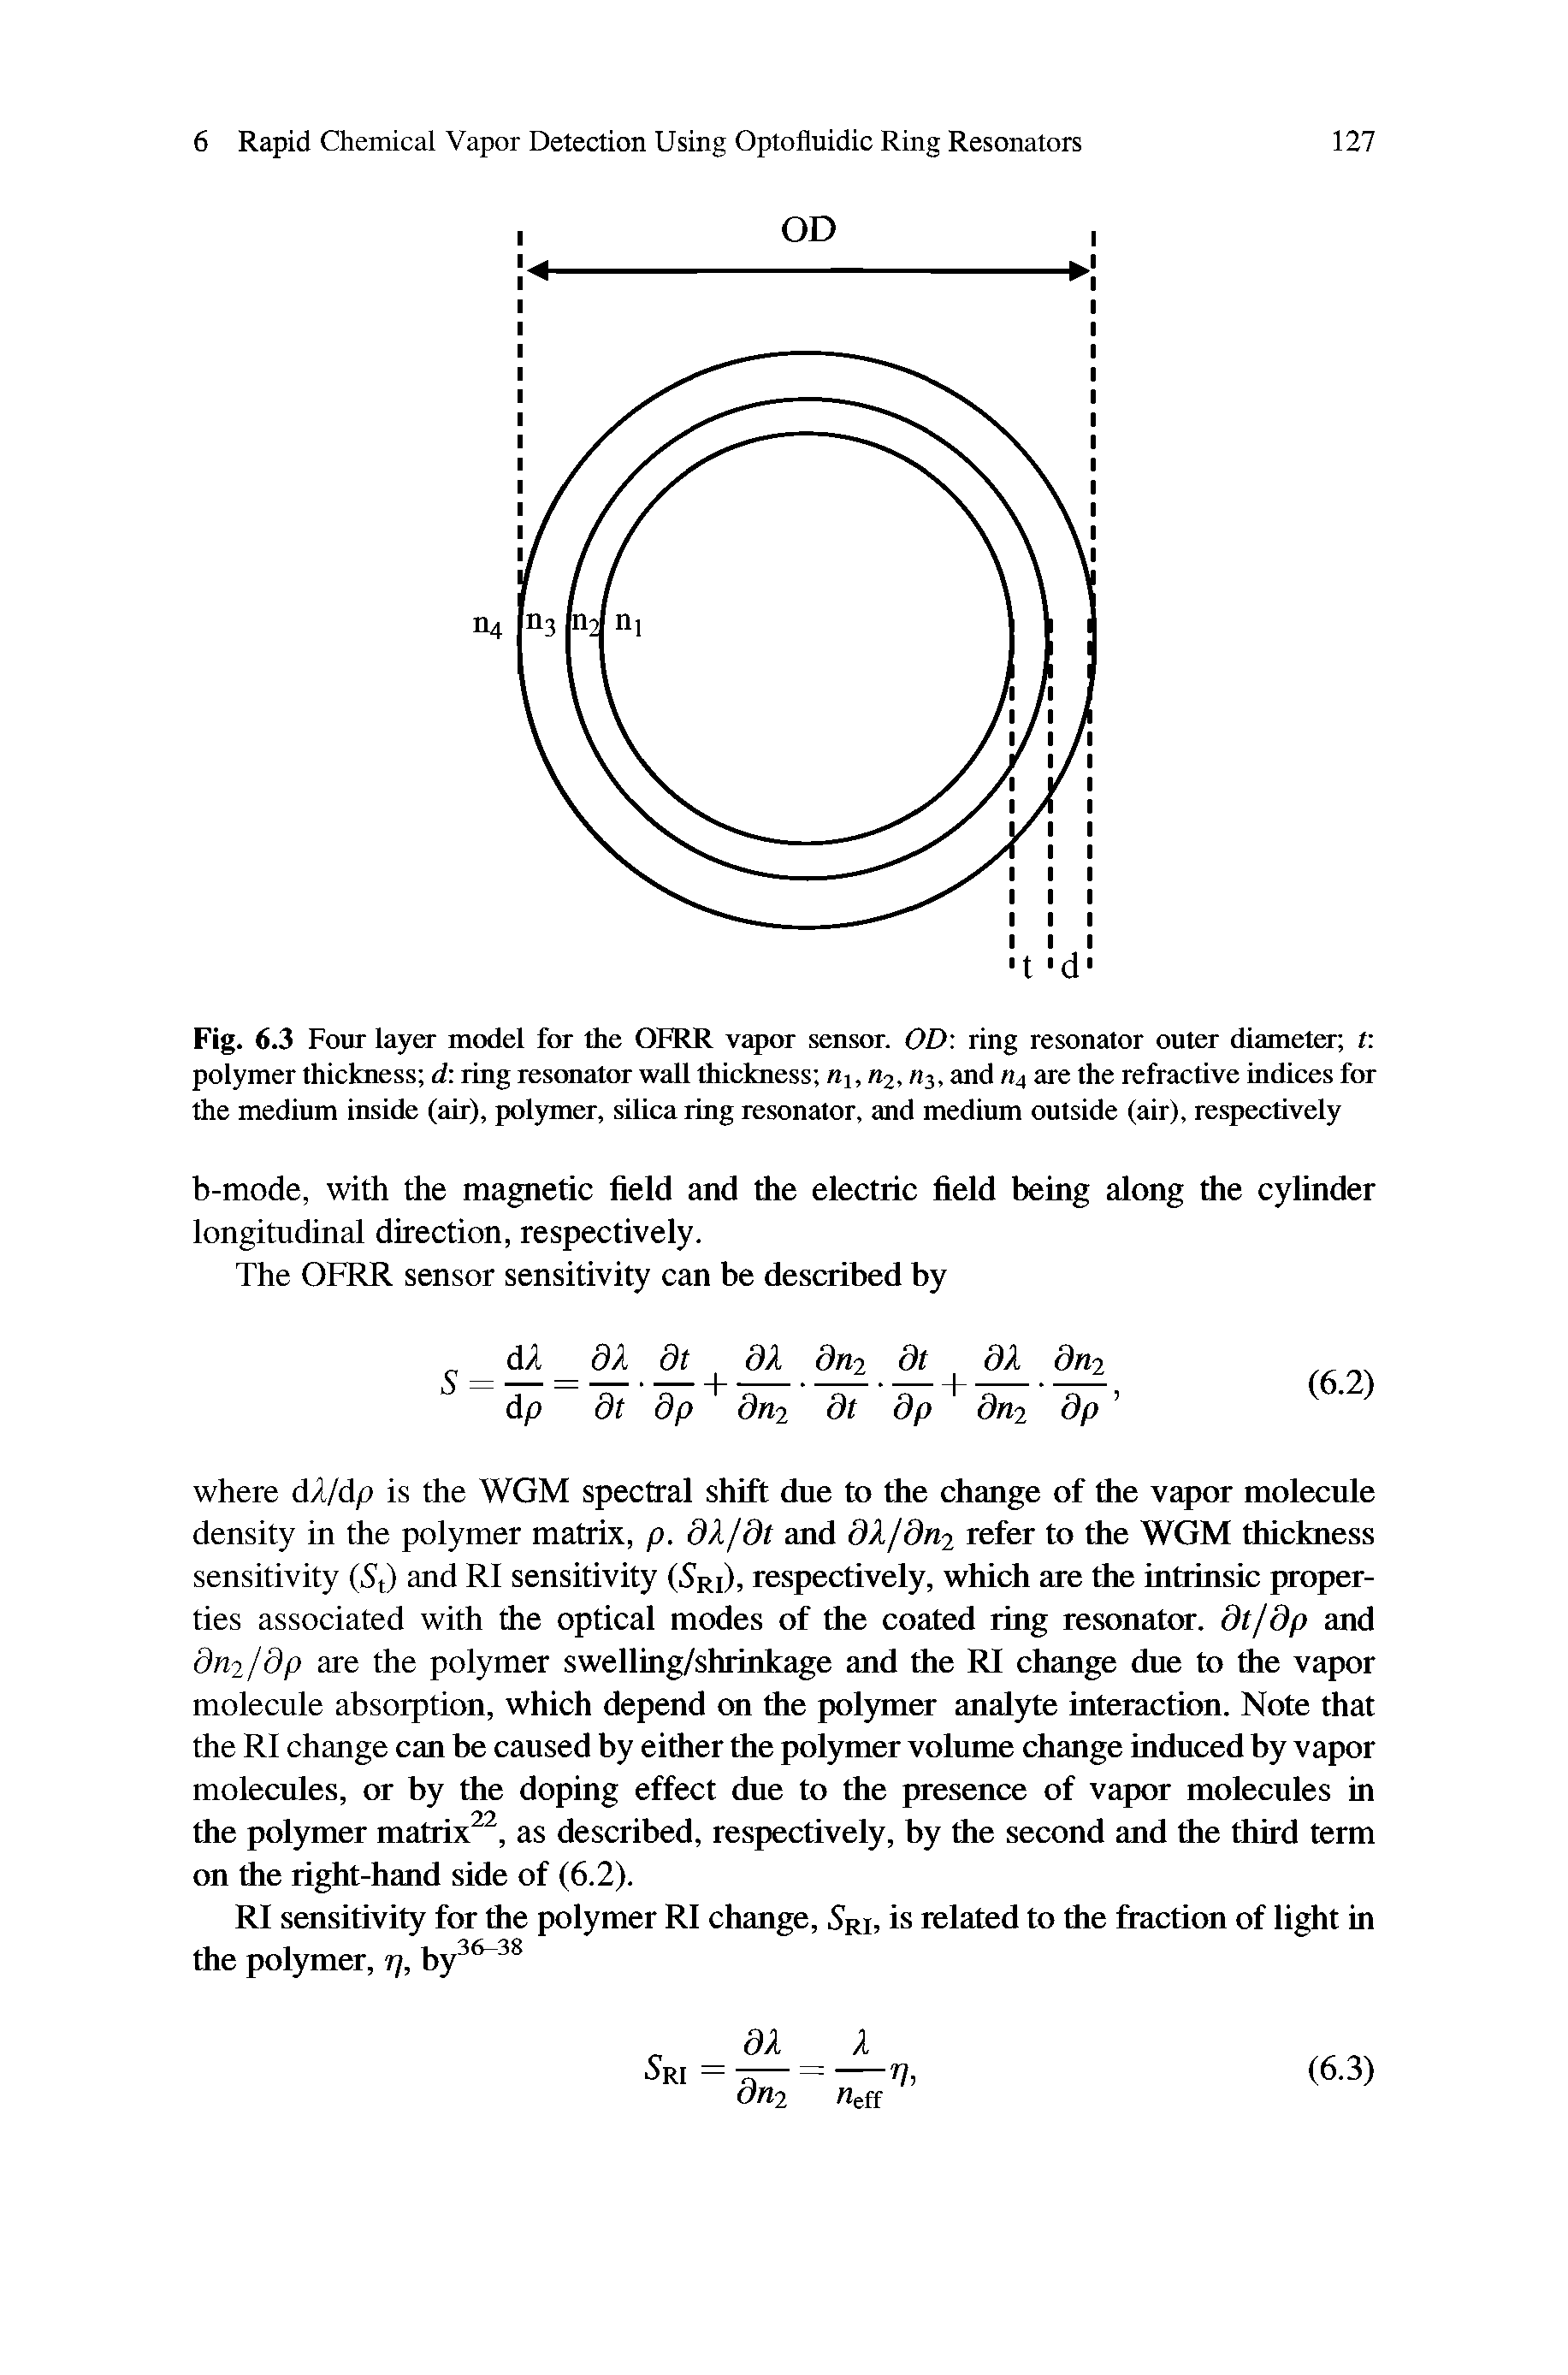 Fig. 6.3 Four layer model for the OFRR vapor sensor. OD ring resonator outer diameter / polymer thickness d ring resonator wall thickness , n2, n2, and are the refractive indices for the medium inside (air), polymer, silica ring resonator, and medium outside (air), respectively...